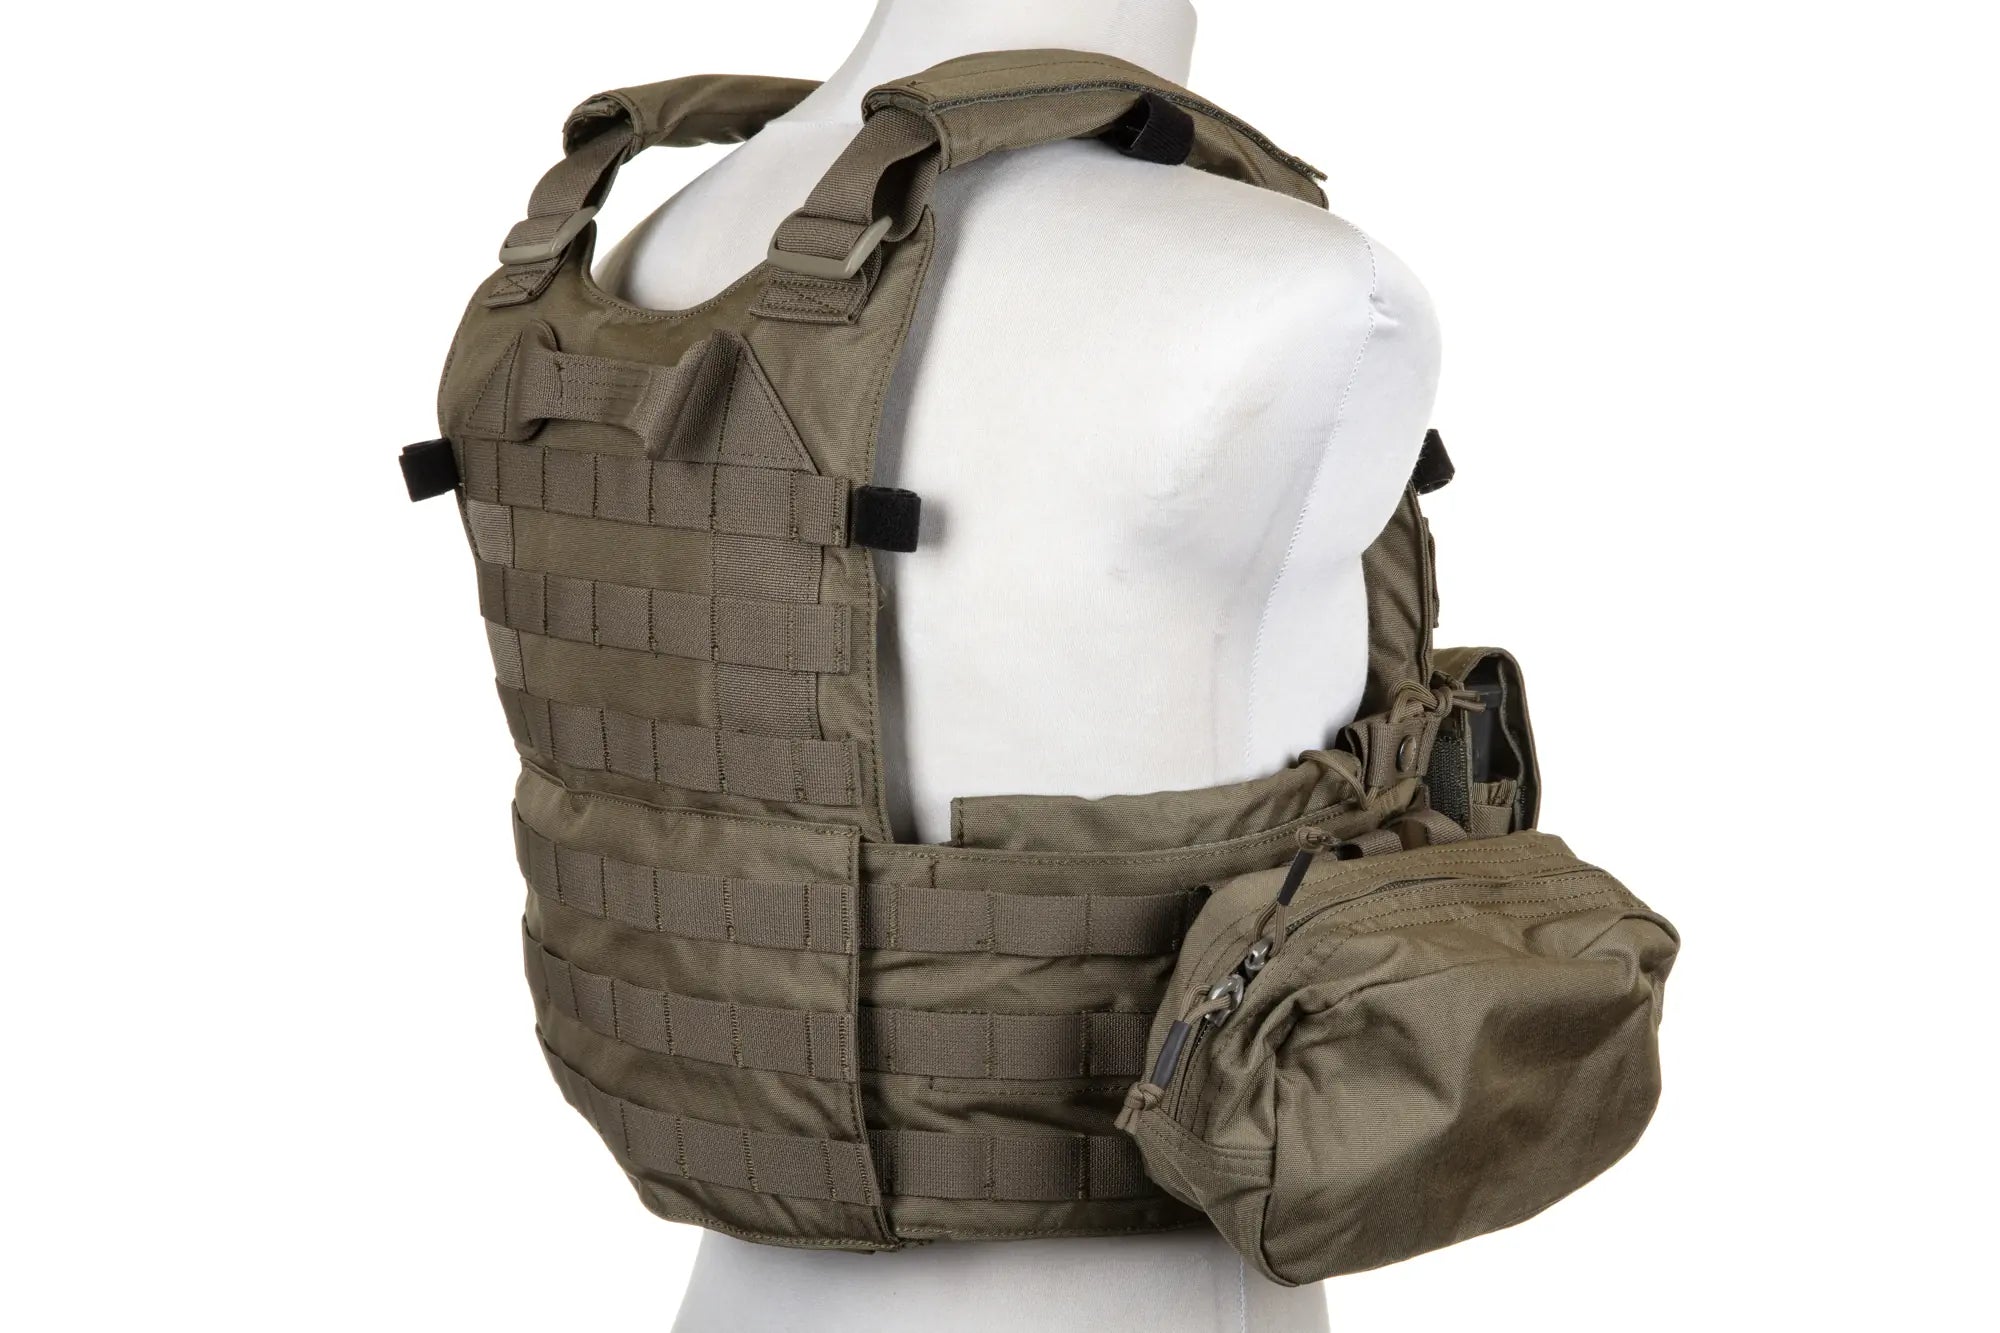 Emerson Gear 6094A Style Plate Carrier waistcoat with Ranger Green cargo kit-3